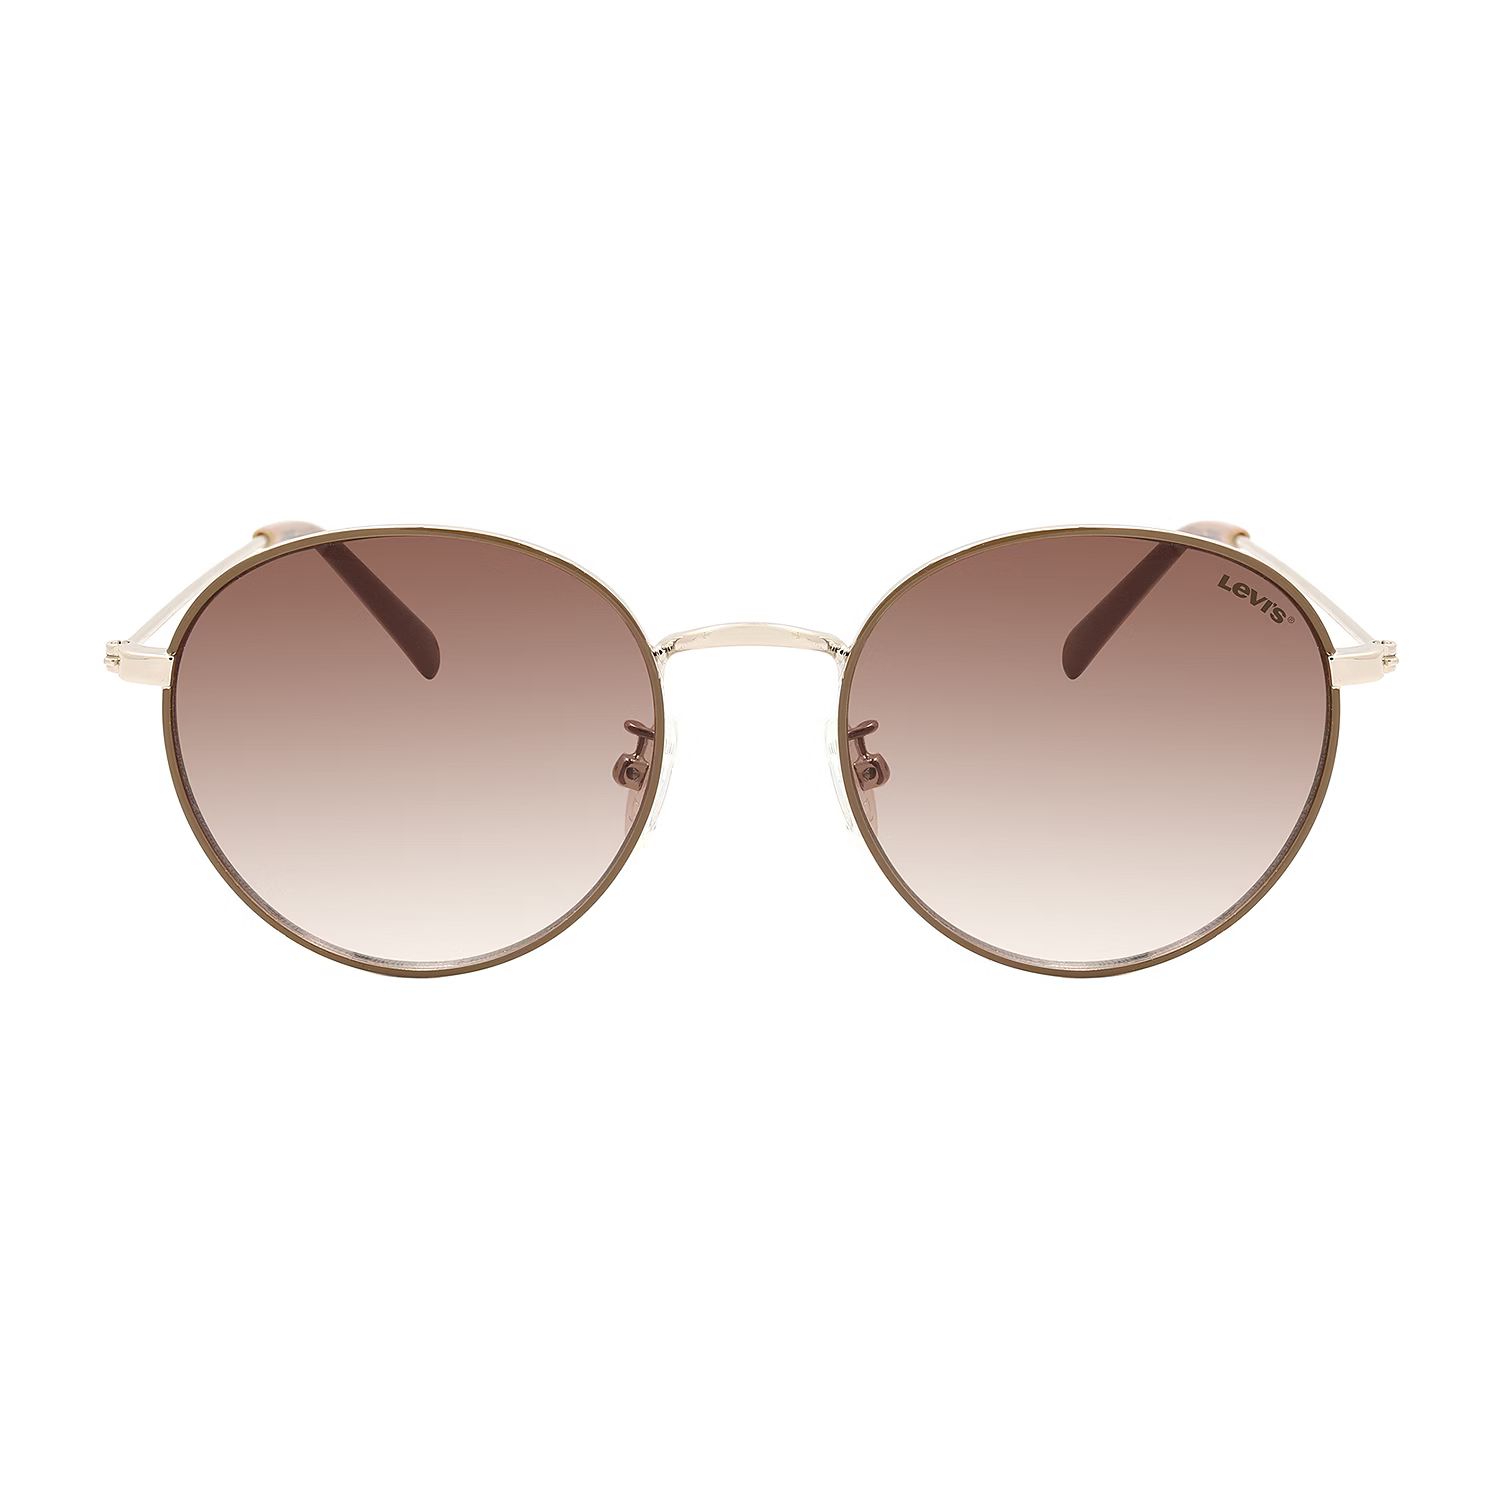 Levi's Womens Round Sunglasses | JCPenney